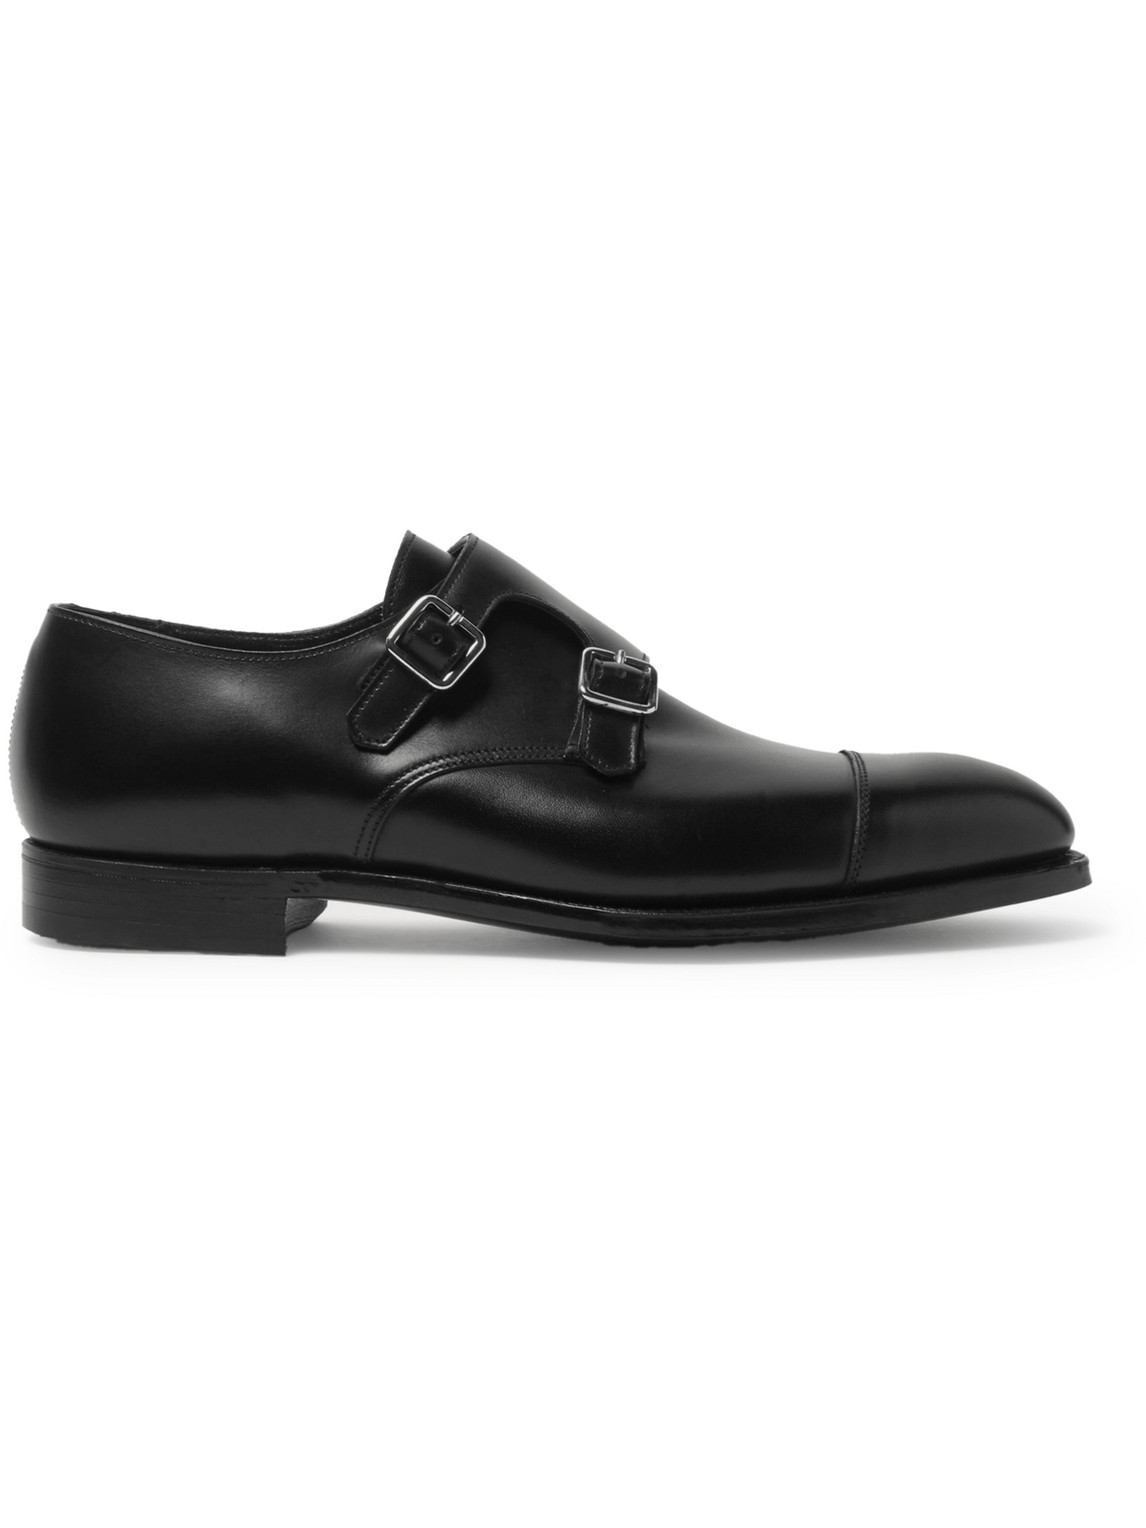 GEORGE CLEVERLEY THOMAS CAP-TOE LEATHER MONK-STRAP SHOES